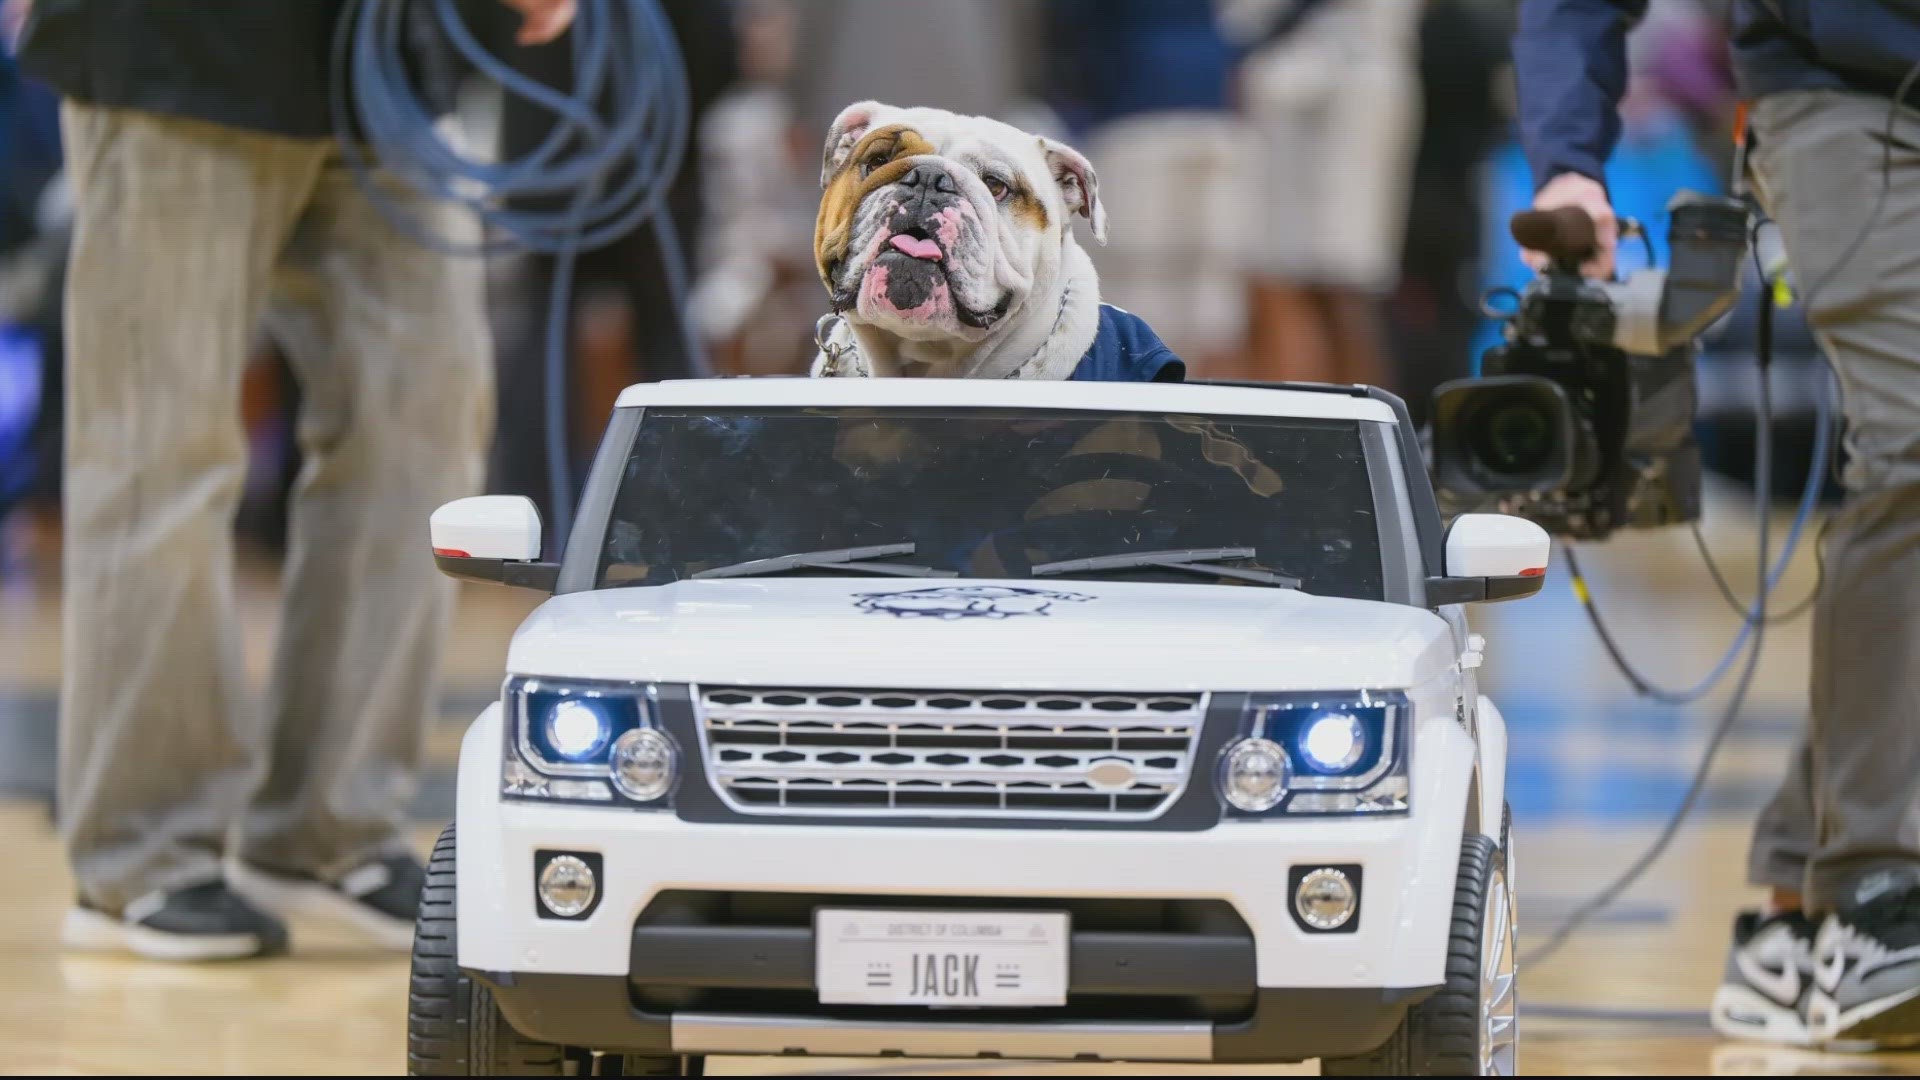 Adopted as the new face of Georgetown in 2019, Jack the Bulldog has touched of the hearts of many during his time as mascot.